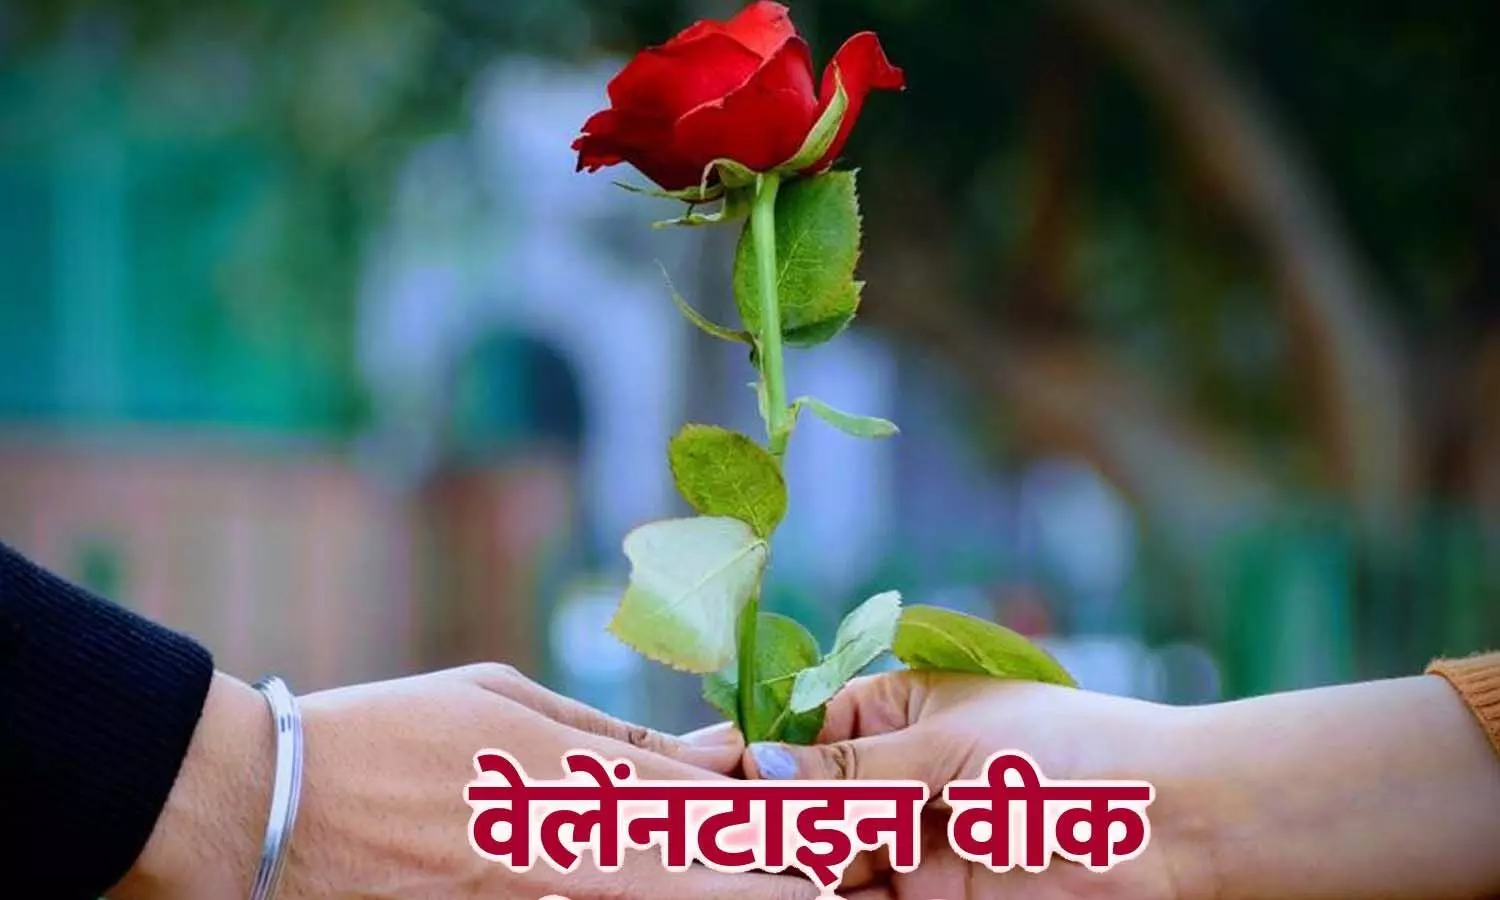 What is the meaning of different colored roses, know here